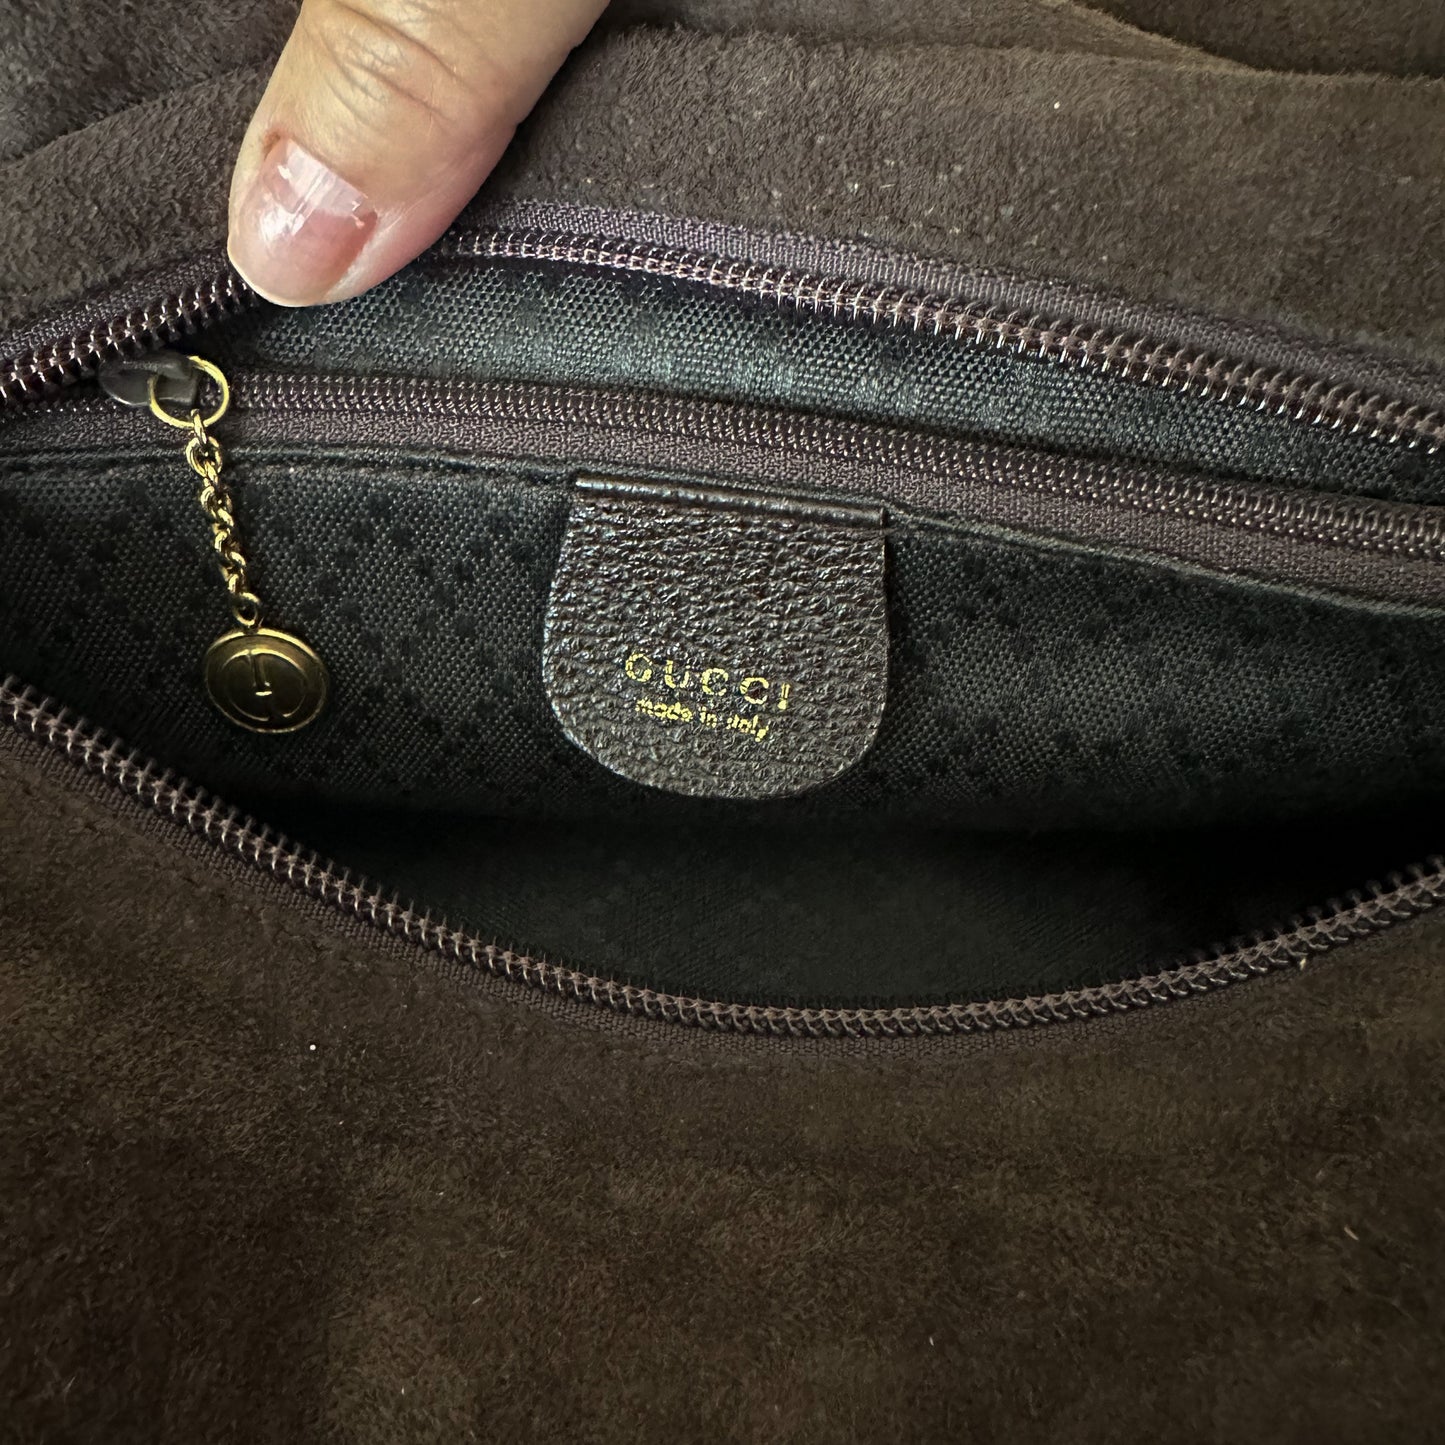 Gucci Vintage Chocolate Suede/Leather Bamboo Handle Bag